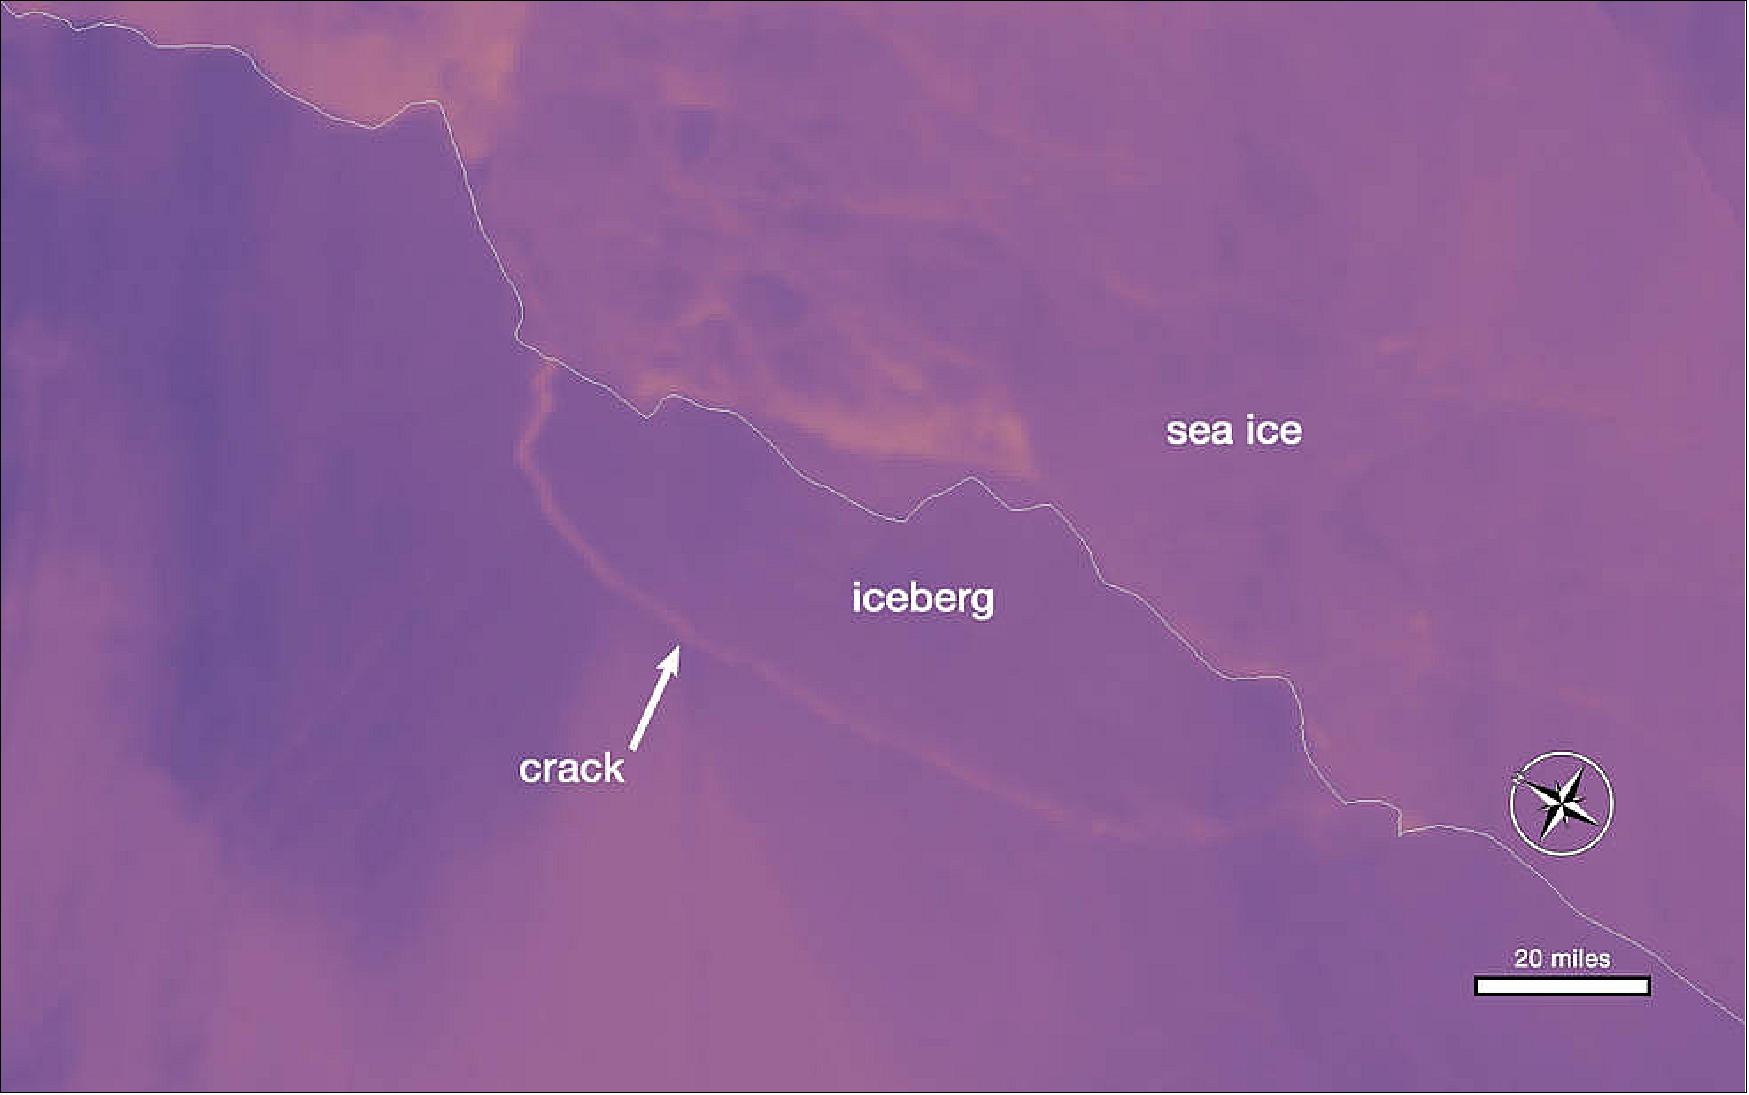 Figure 98: Thermal wavelength image of a large iceberg, which has calved off the Larsen C ice shelf. Darker colors are colder, and brighter colors are warmer, so the rift between the iceberg and the ice shelf appears as a thin line of slightly warmer area. Image from July 12, 2017, from the MODIS instrument on NASA's Aqua satellite (image credit: NASA Worldview)